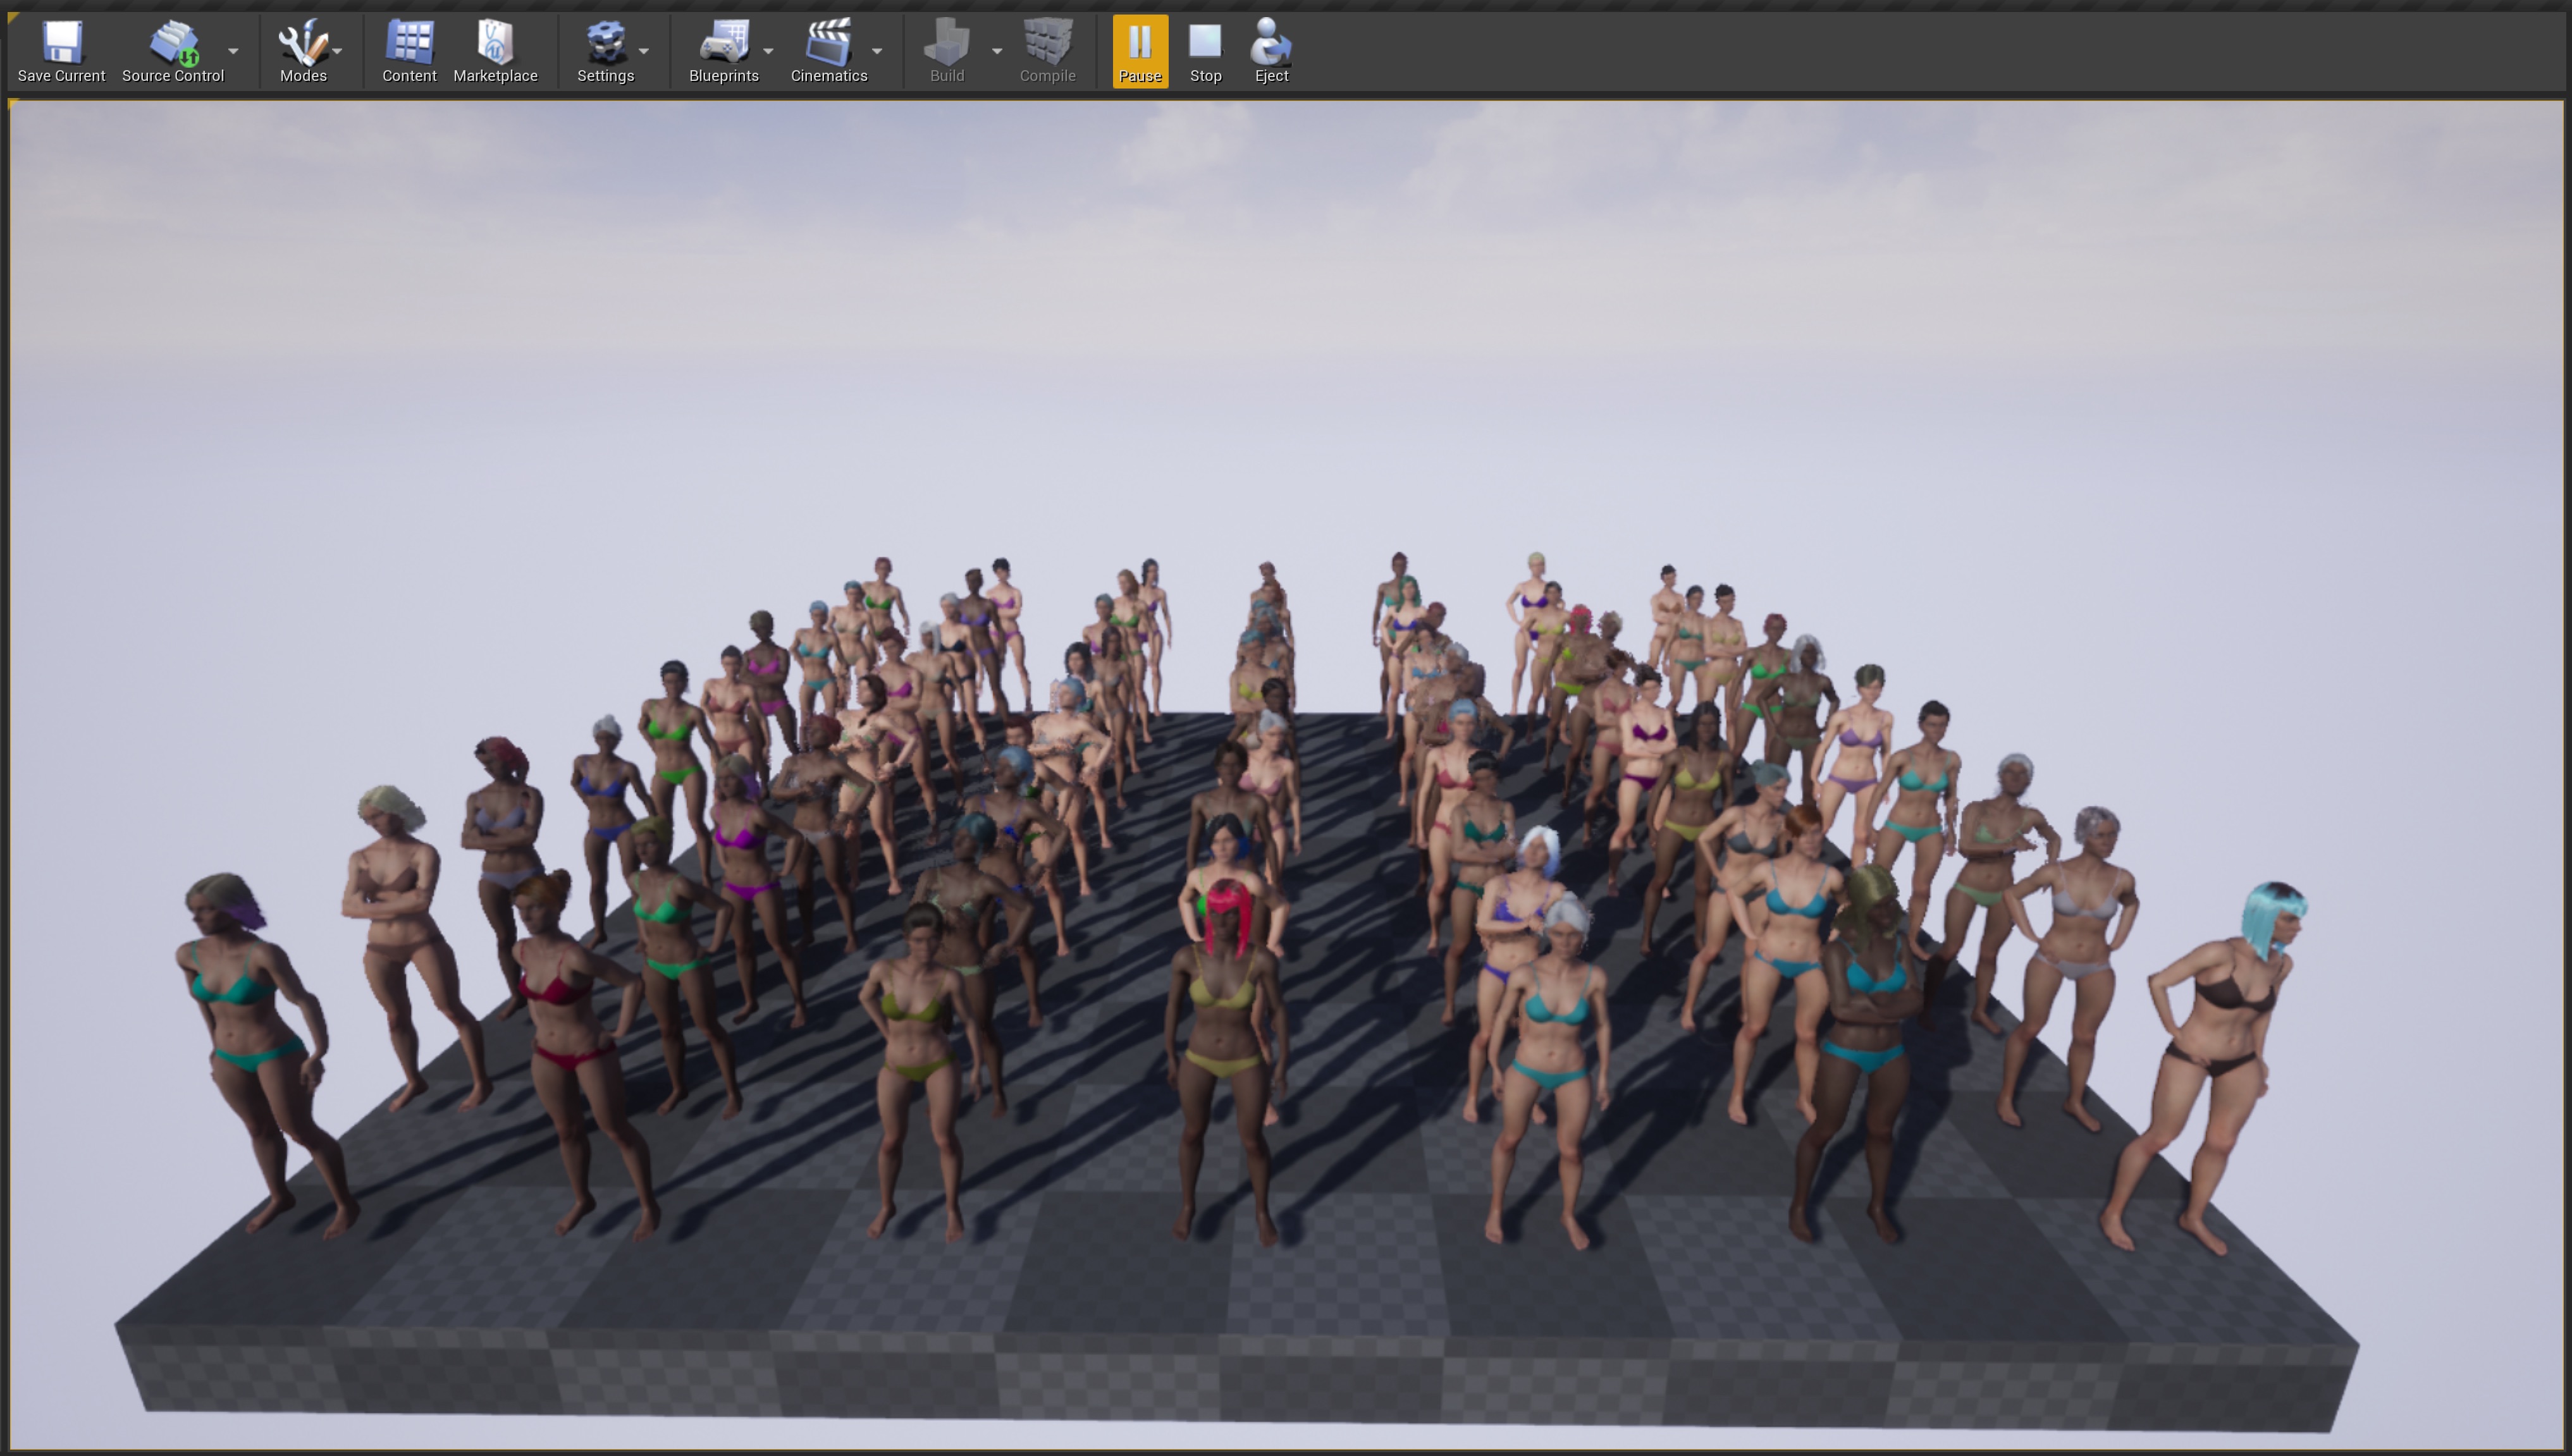 A screenshot showing dozens of female character models with different hair options and skin colors.